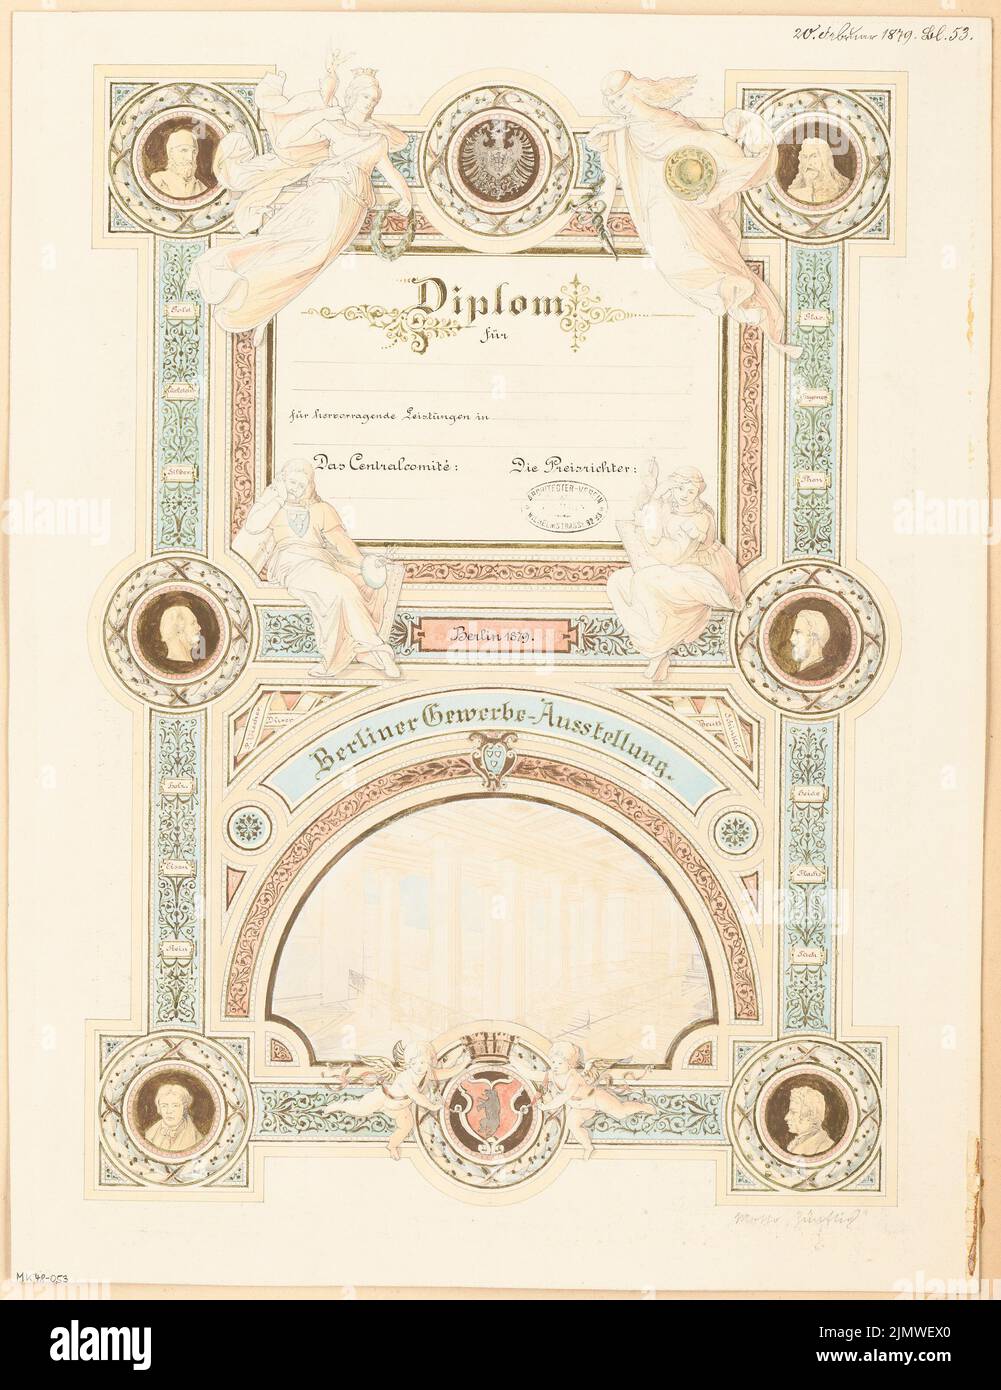 Unknown architect, diploma for the Berlin trade exhibition 1879. Monthly competition February 1879 (02.1879): View. Ink and pencil watercolored on the box, 57.4 x 44.2 cm (including scan edges) N.N. : Diplom für die Berliner Gewerbeausstellung 1879. Monatskonkurrenz Februar 1879 Stock Photo